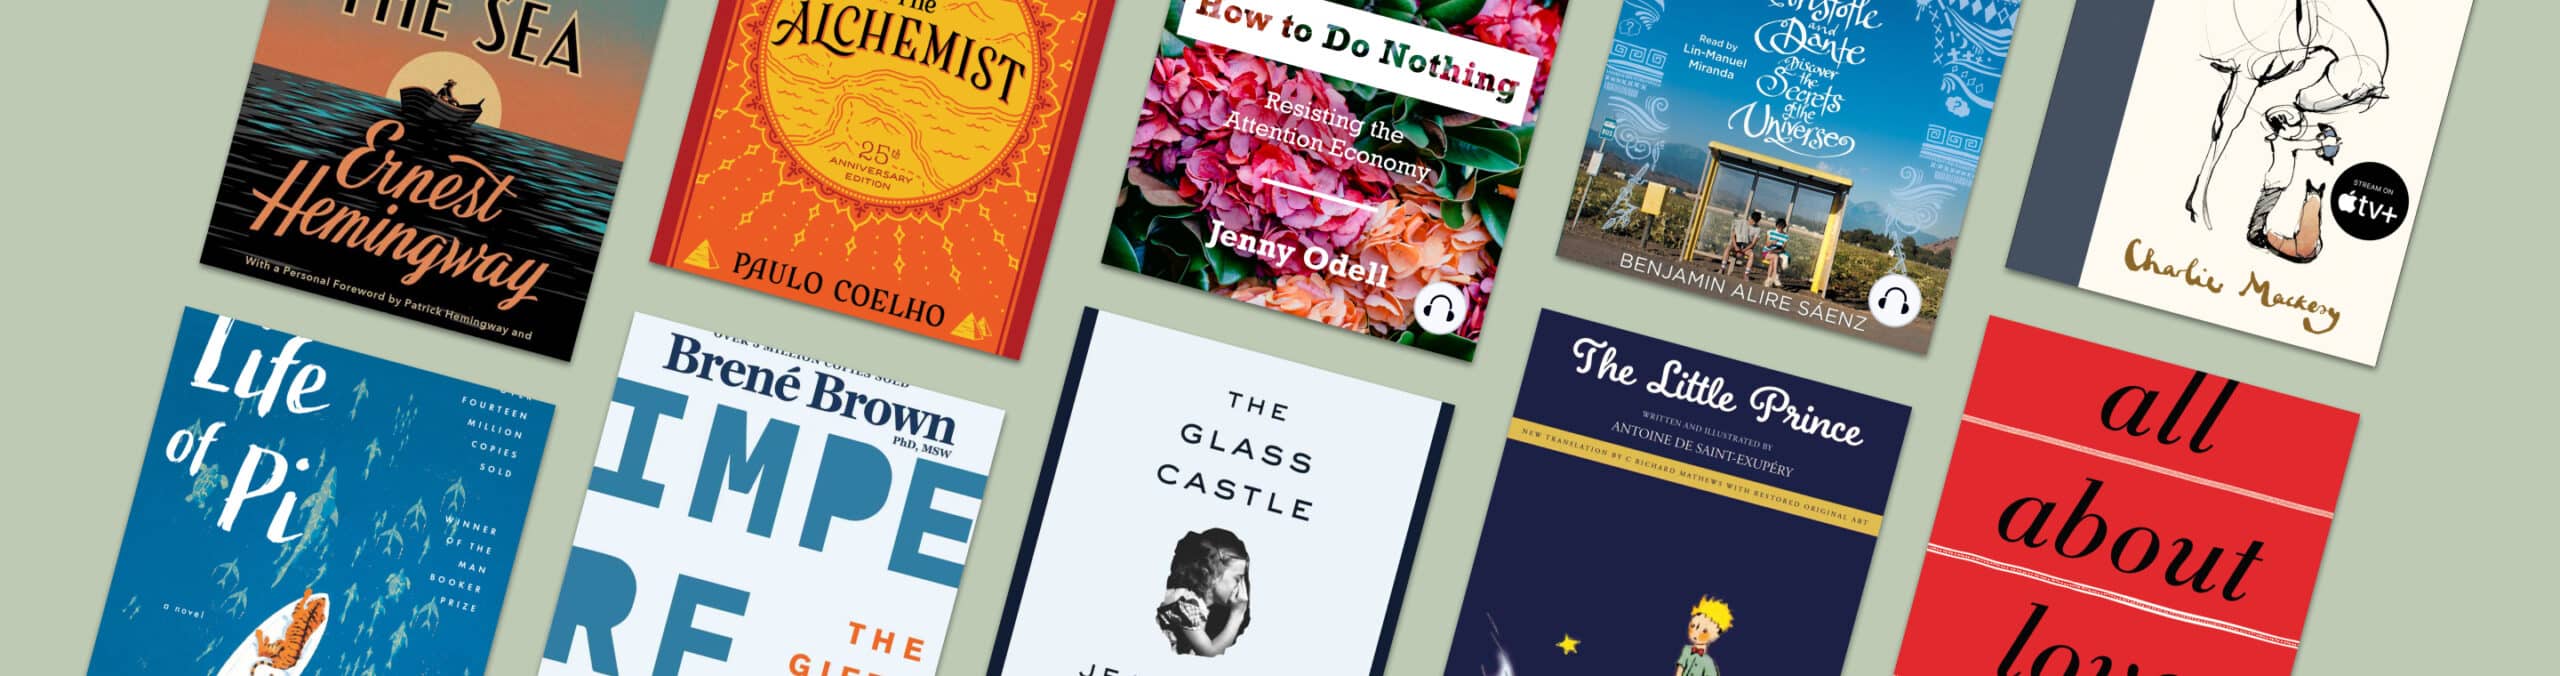 18 books that teach important life lessons to live by